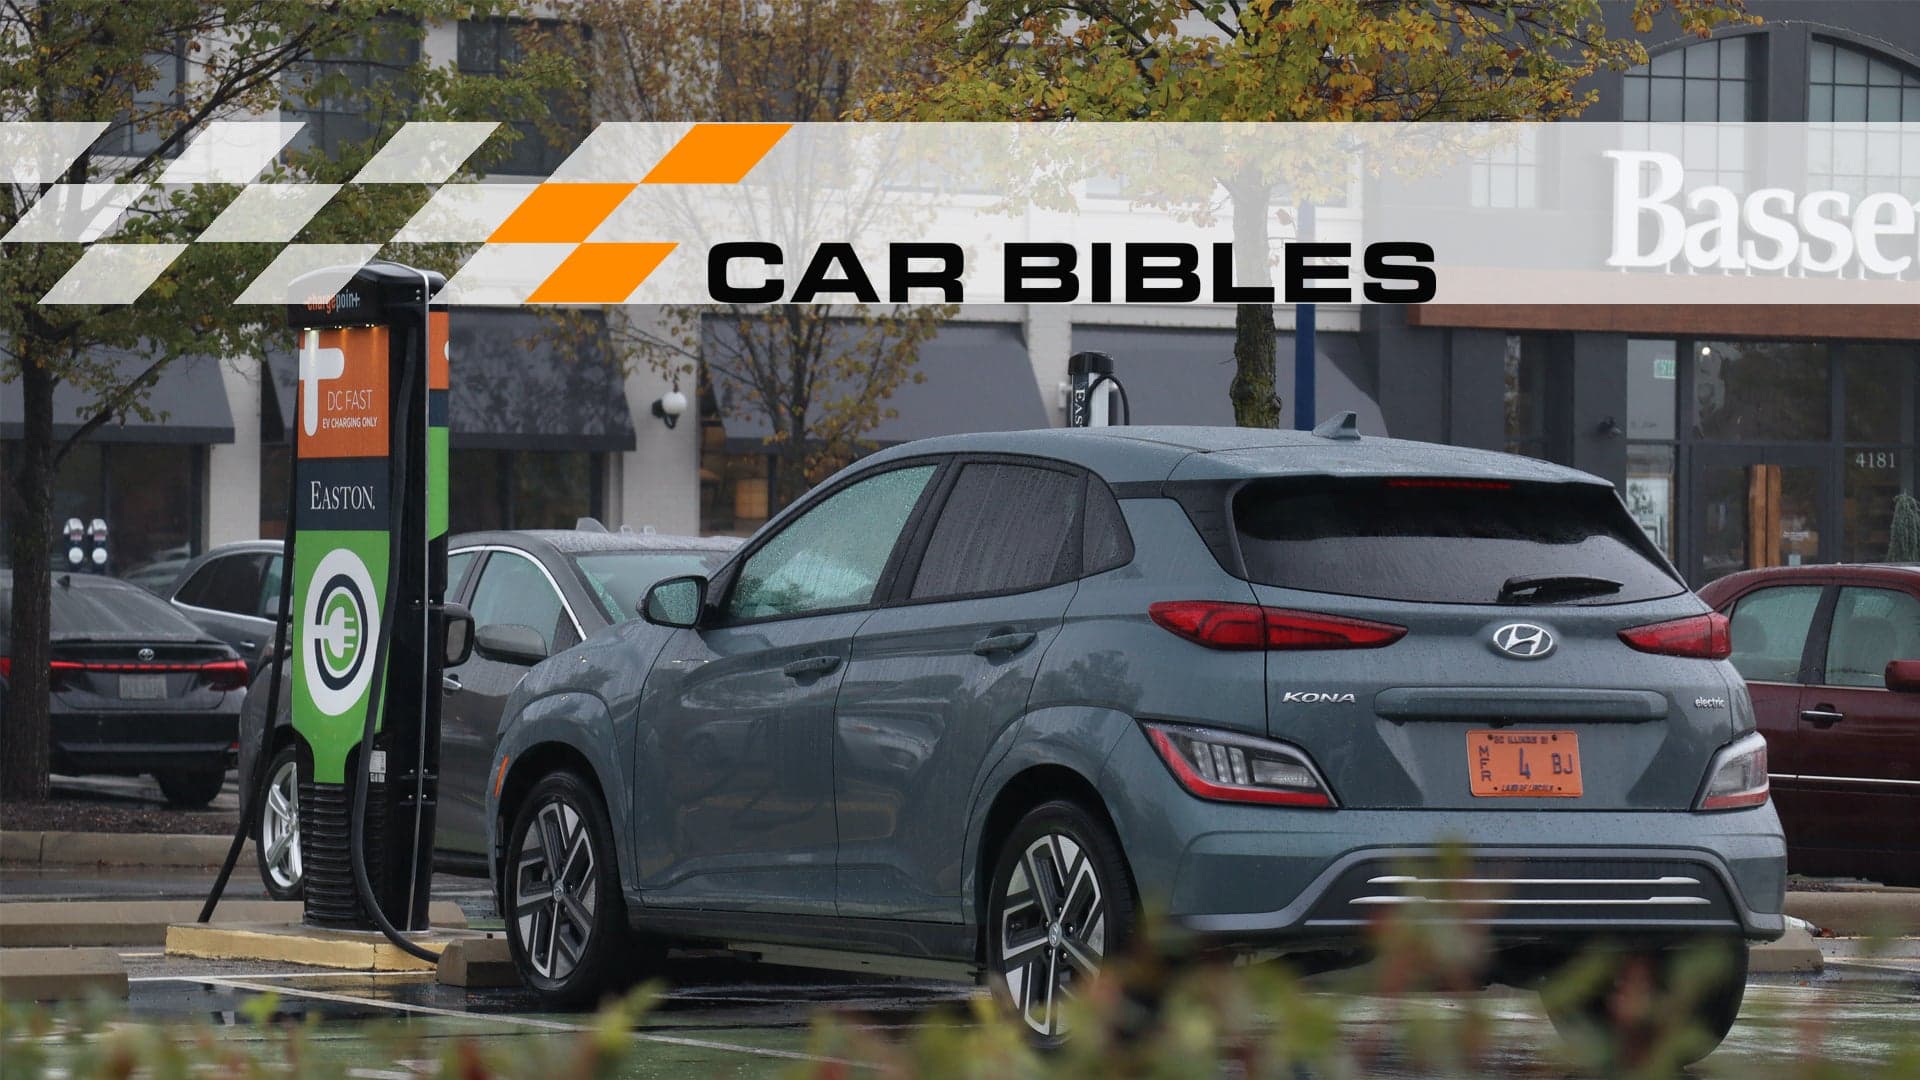 Car Bibles Is Testing EVs in Ohio, Where Charging Leaves a Lot to Be Desired